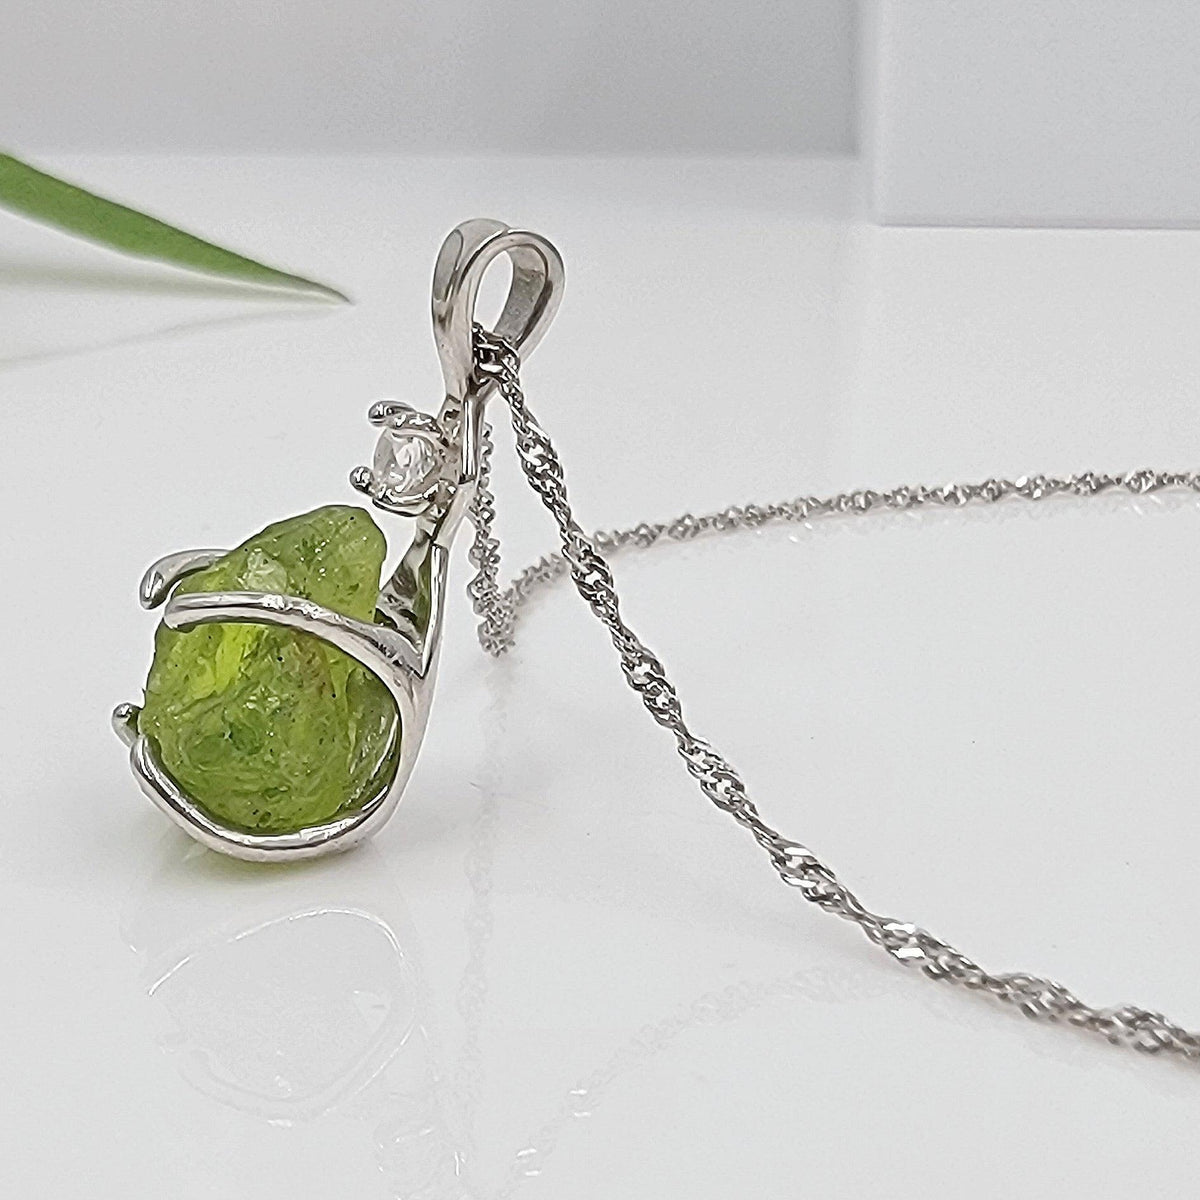 Amazon.com: Dainty Real Green Peridot Crystal Pendant 925 Sterling Silver  Chain Necklace and Healing Chakra Crystal Stone August Birthstone Handmade  Choker Necklace Jewelry Gift for Women Teen Girls 1 Bead : Handmade Products